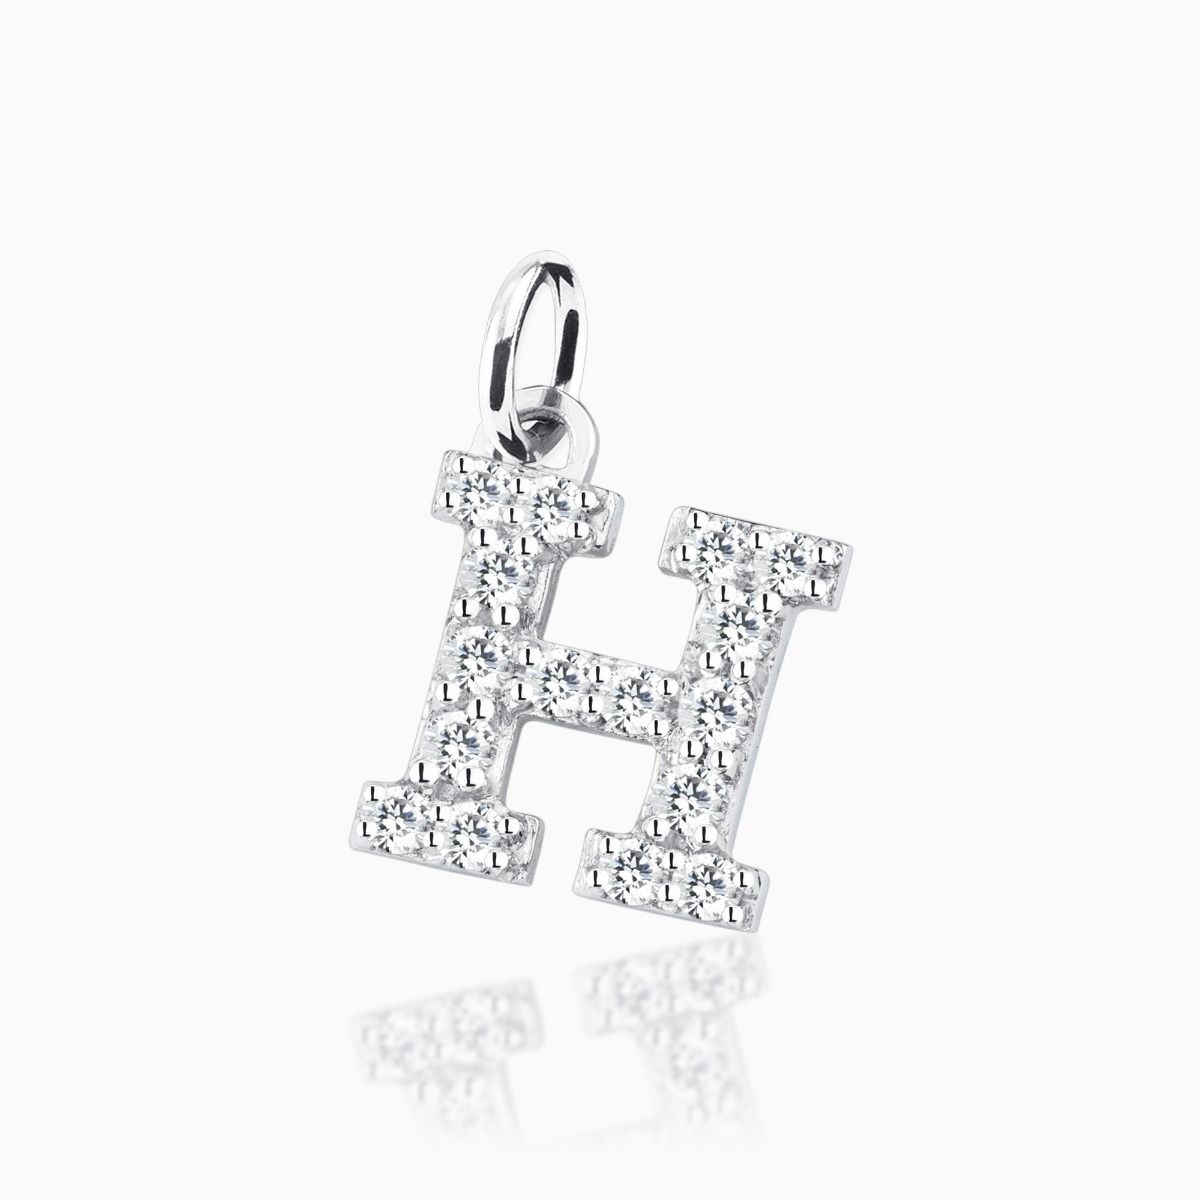 Letter H pave setting